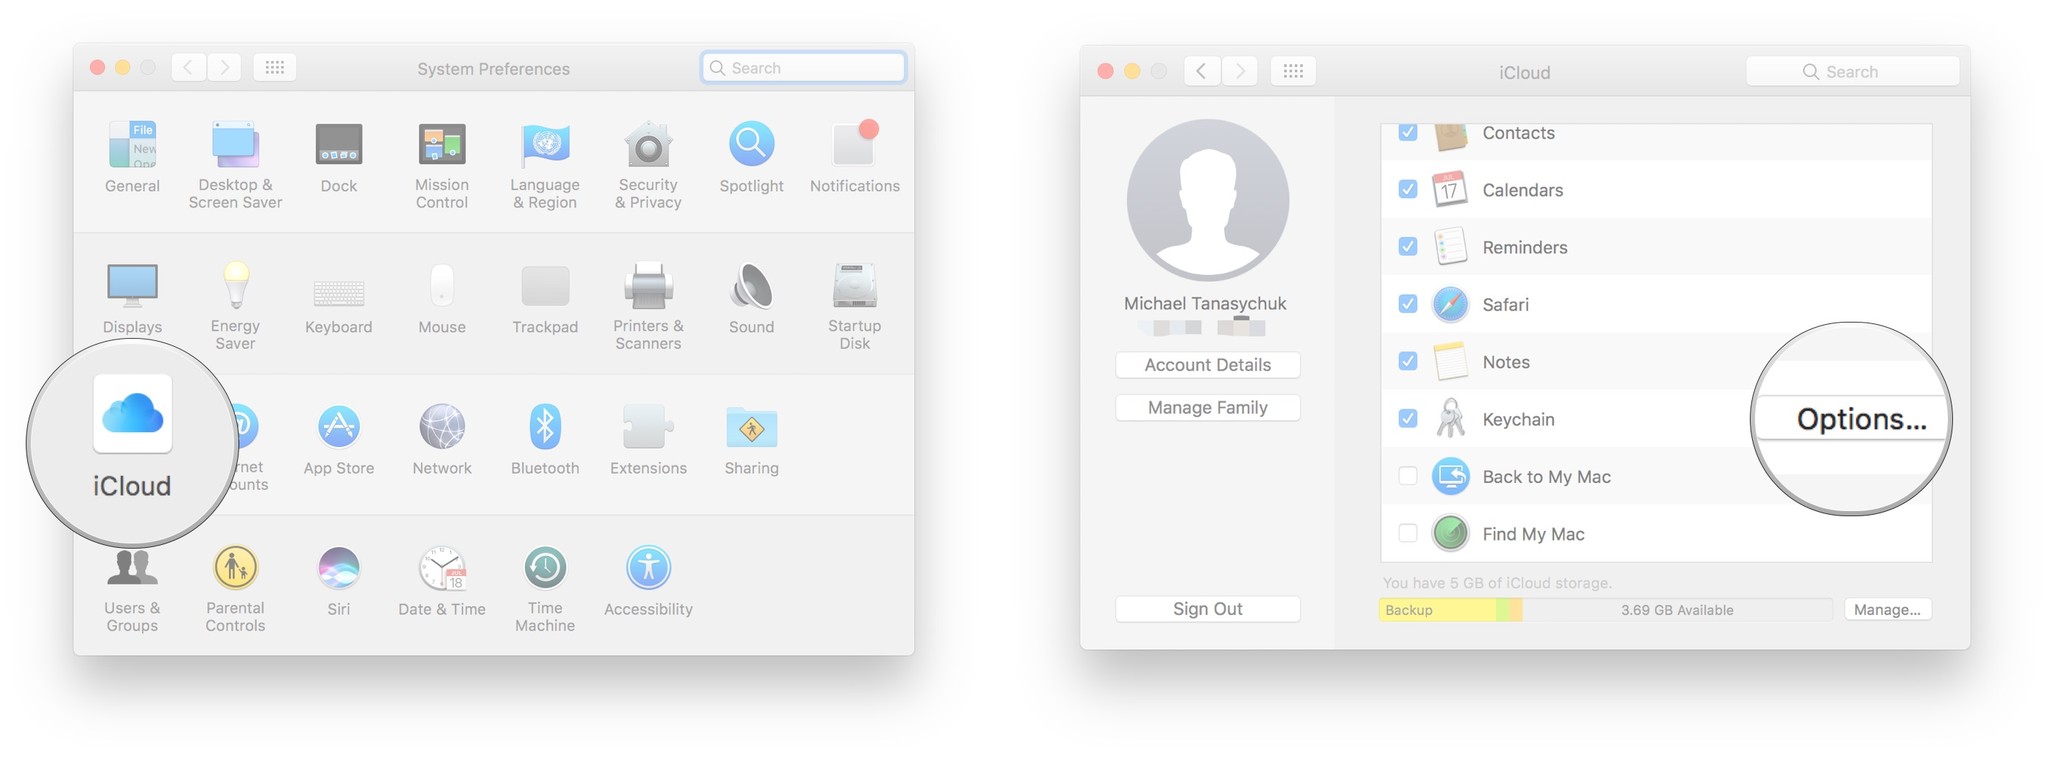 Launch System Preferences, click iCloud, click Options next to Keychain